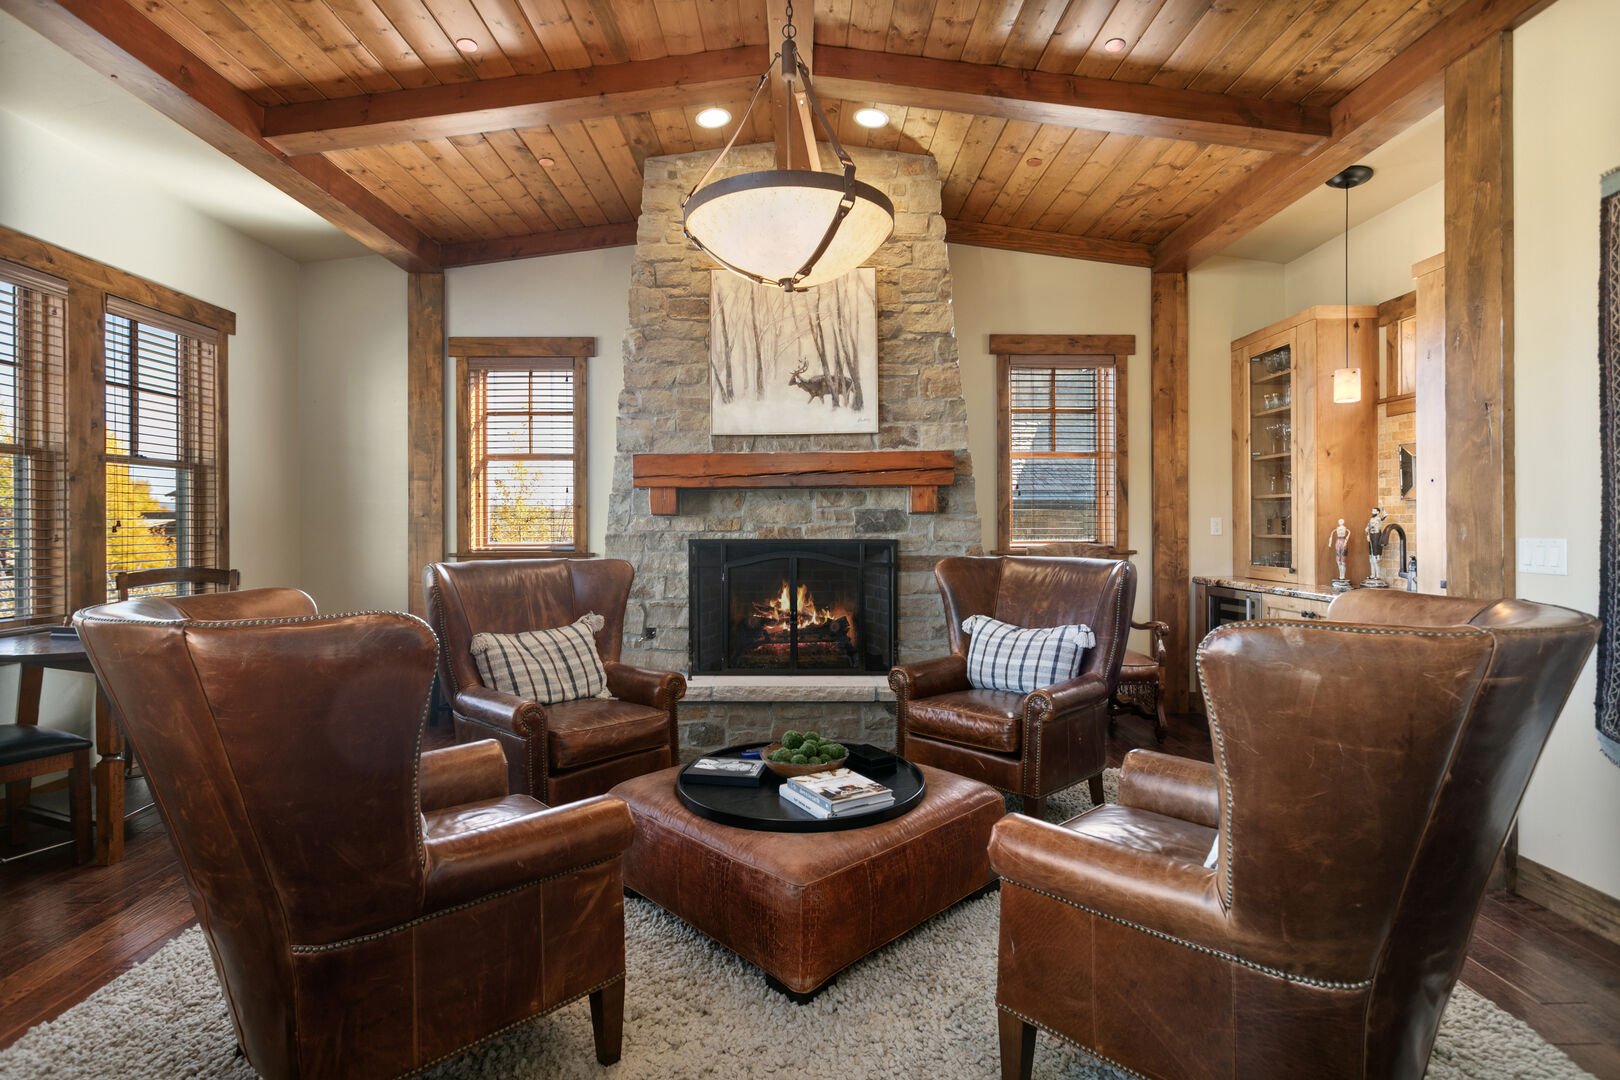 Comfortable chairs surrounding the cozy fireplace.